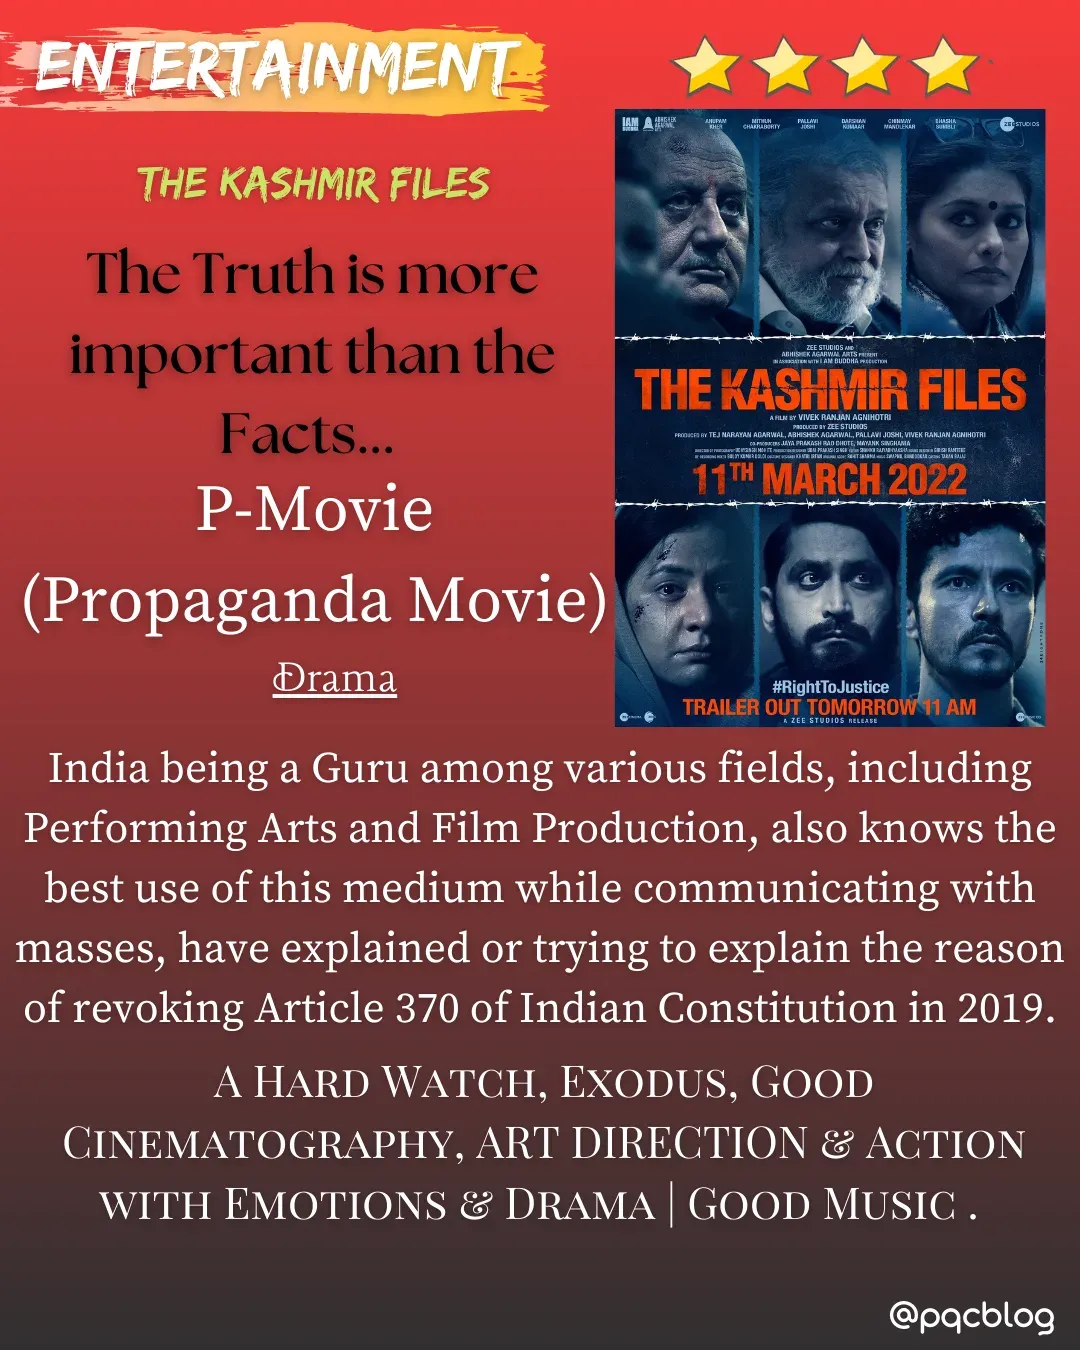 The Kashmir Files Review (Content Analysis) by pqcblog